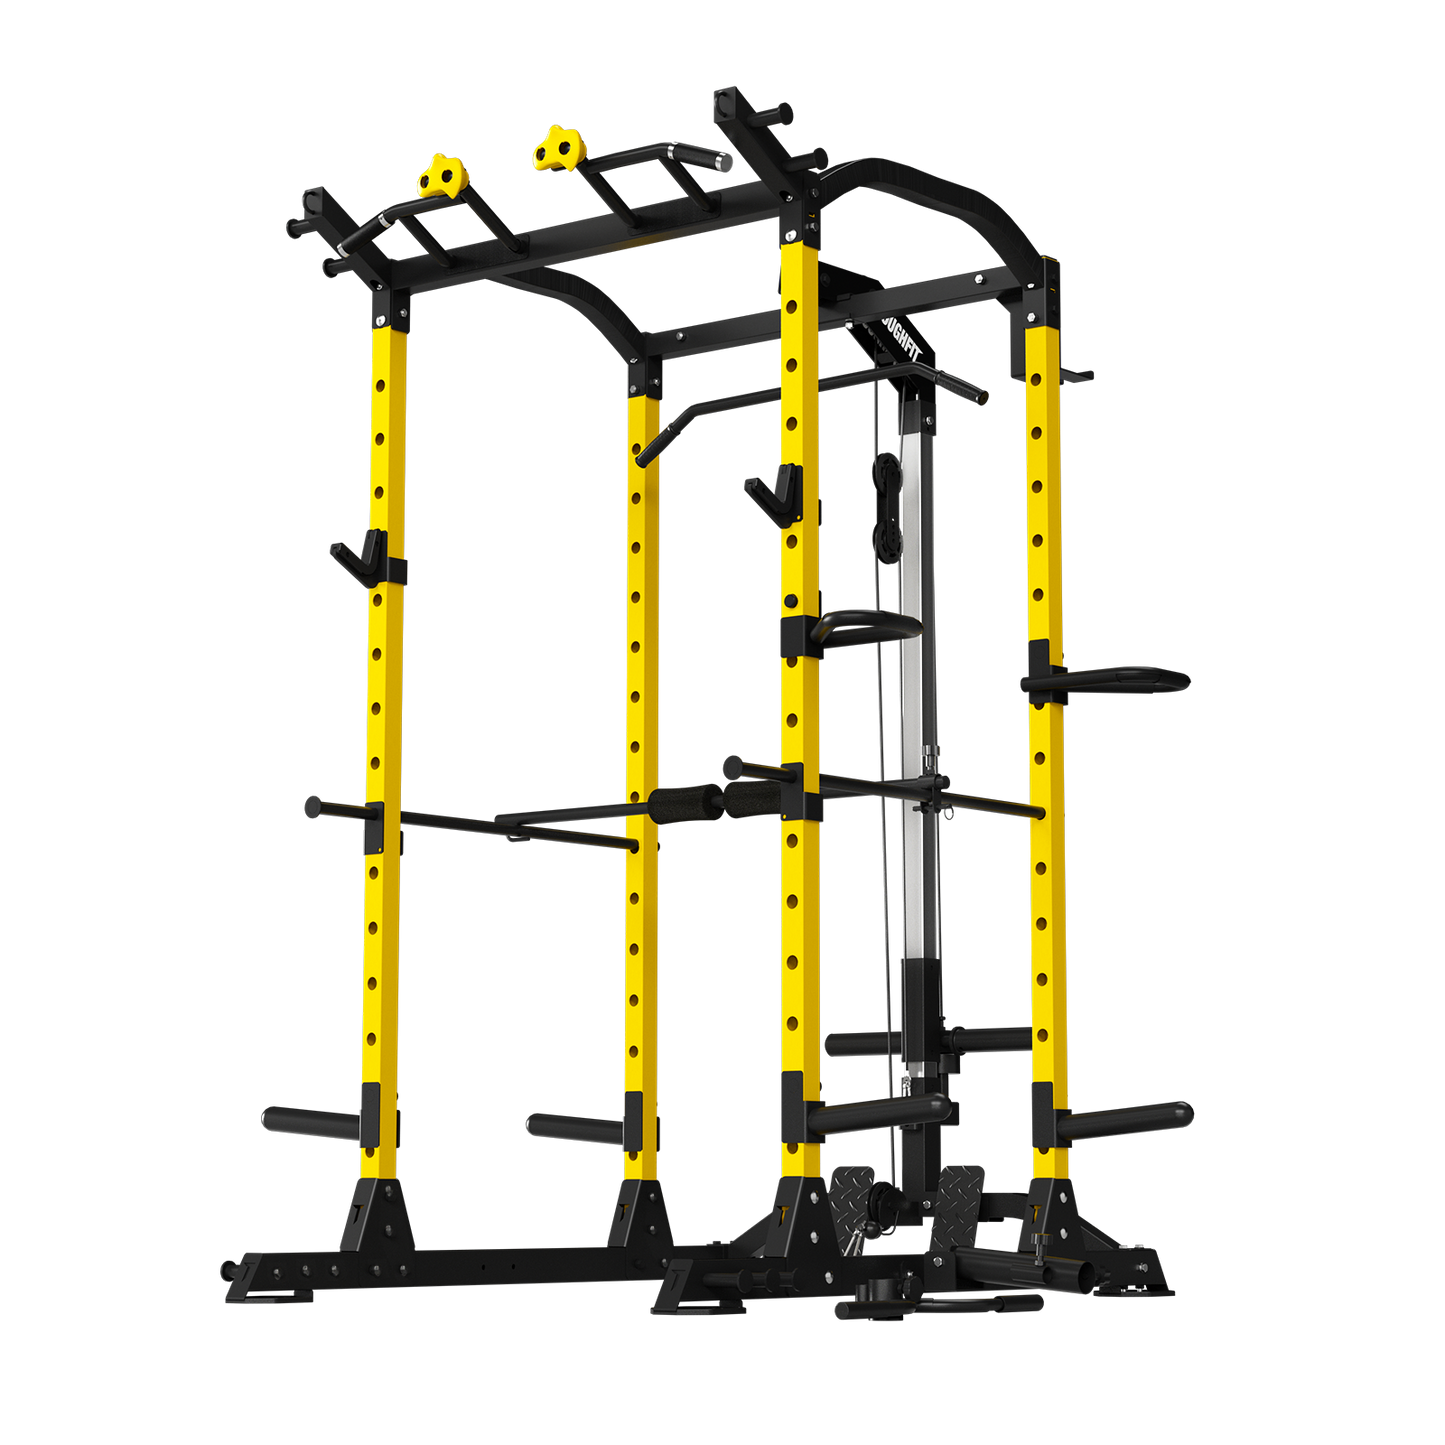 ToughFit PR-410 Max Power Rack with Lat Pulldown Pulley System